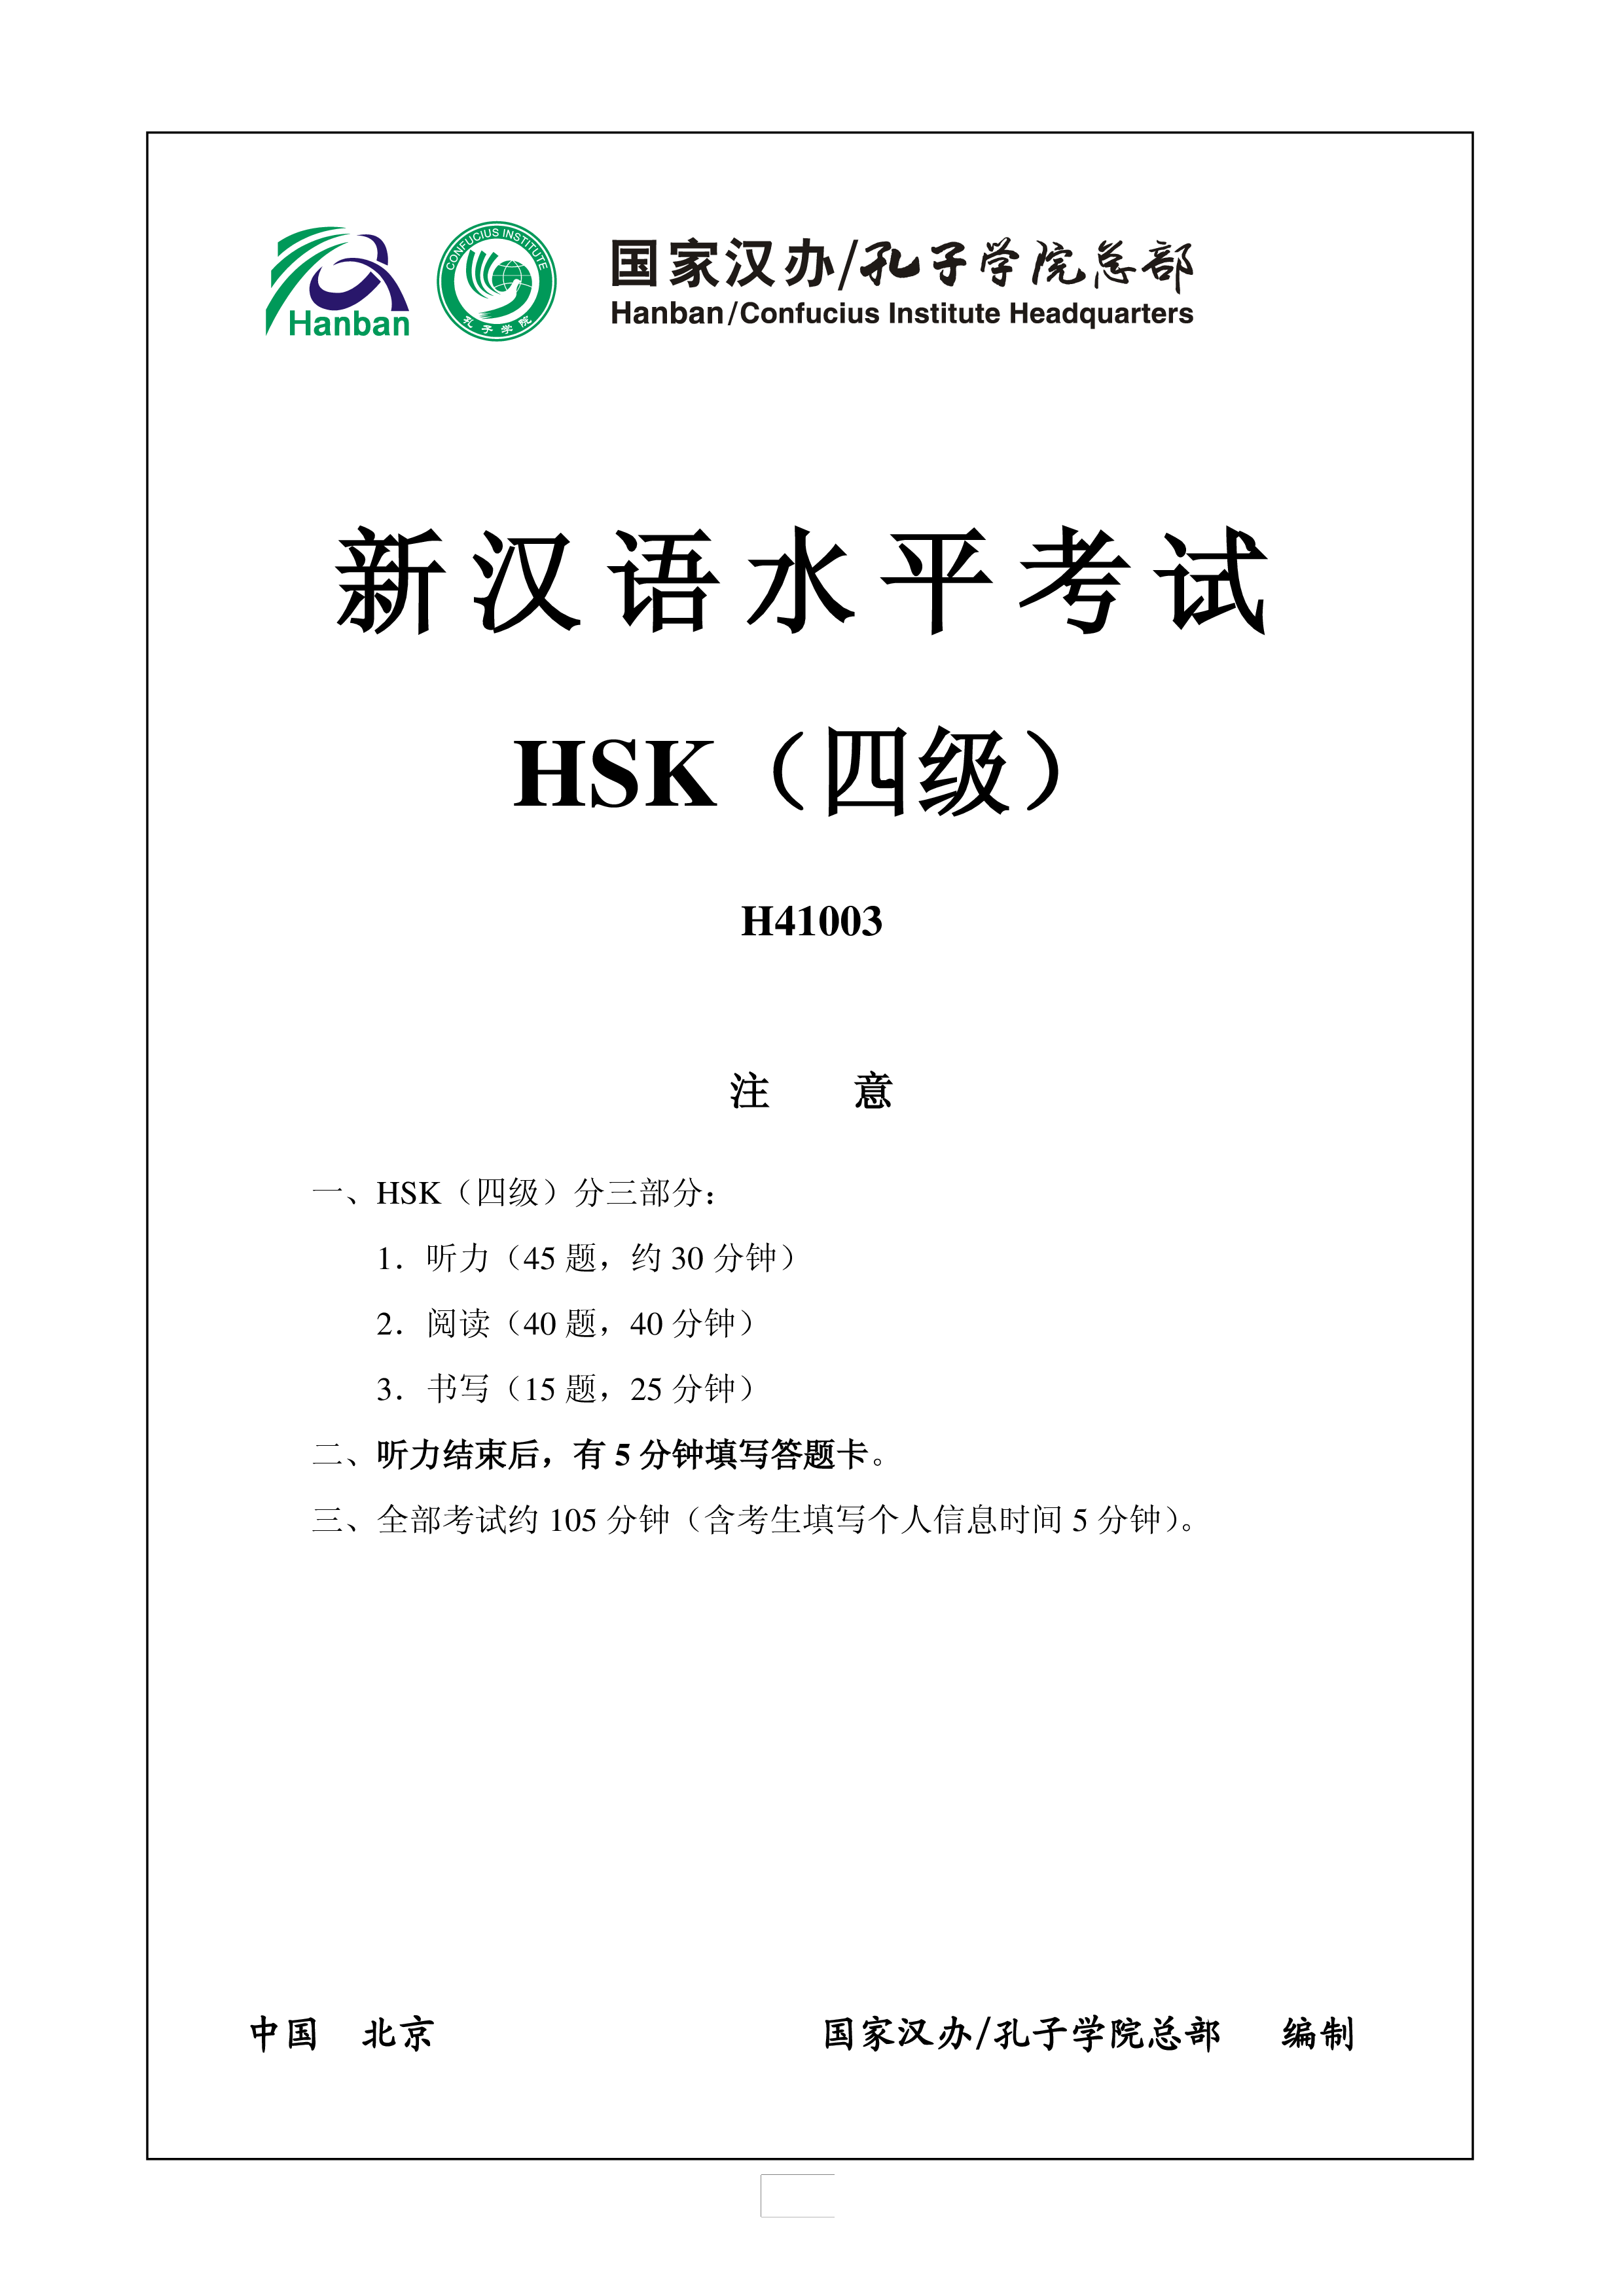 hsk4 chinese exam including answers # hsk h41003 template